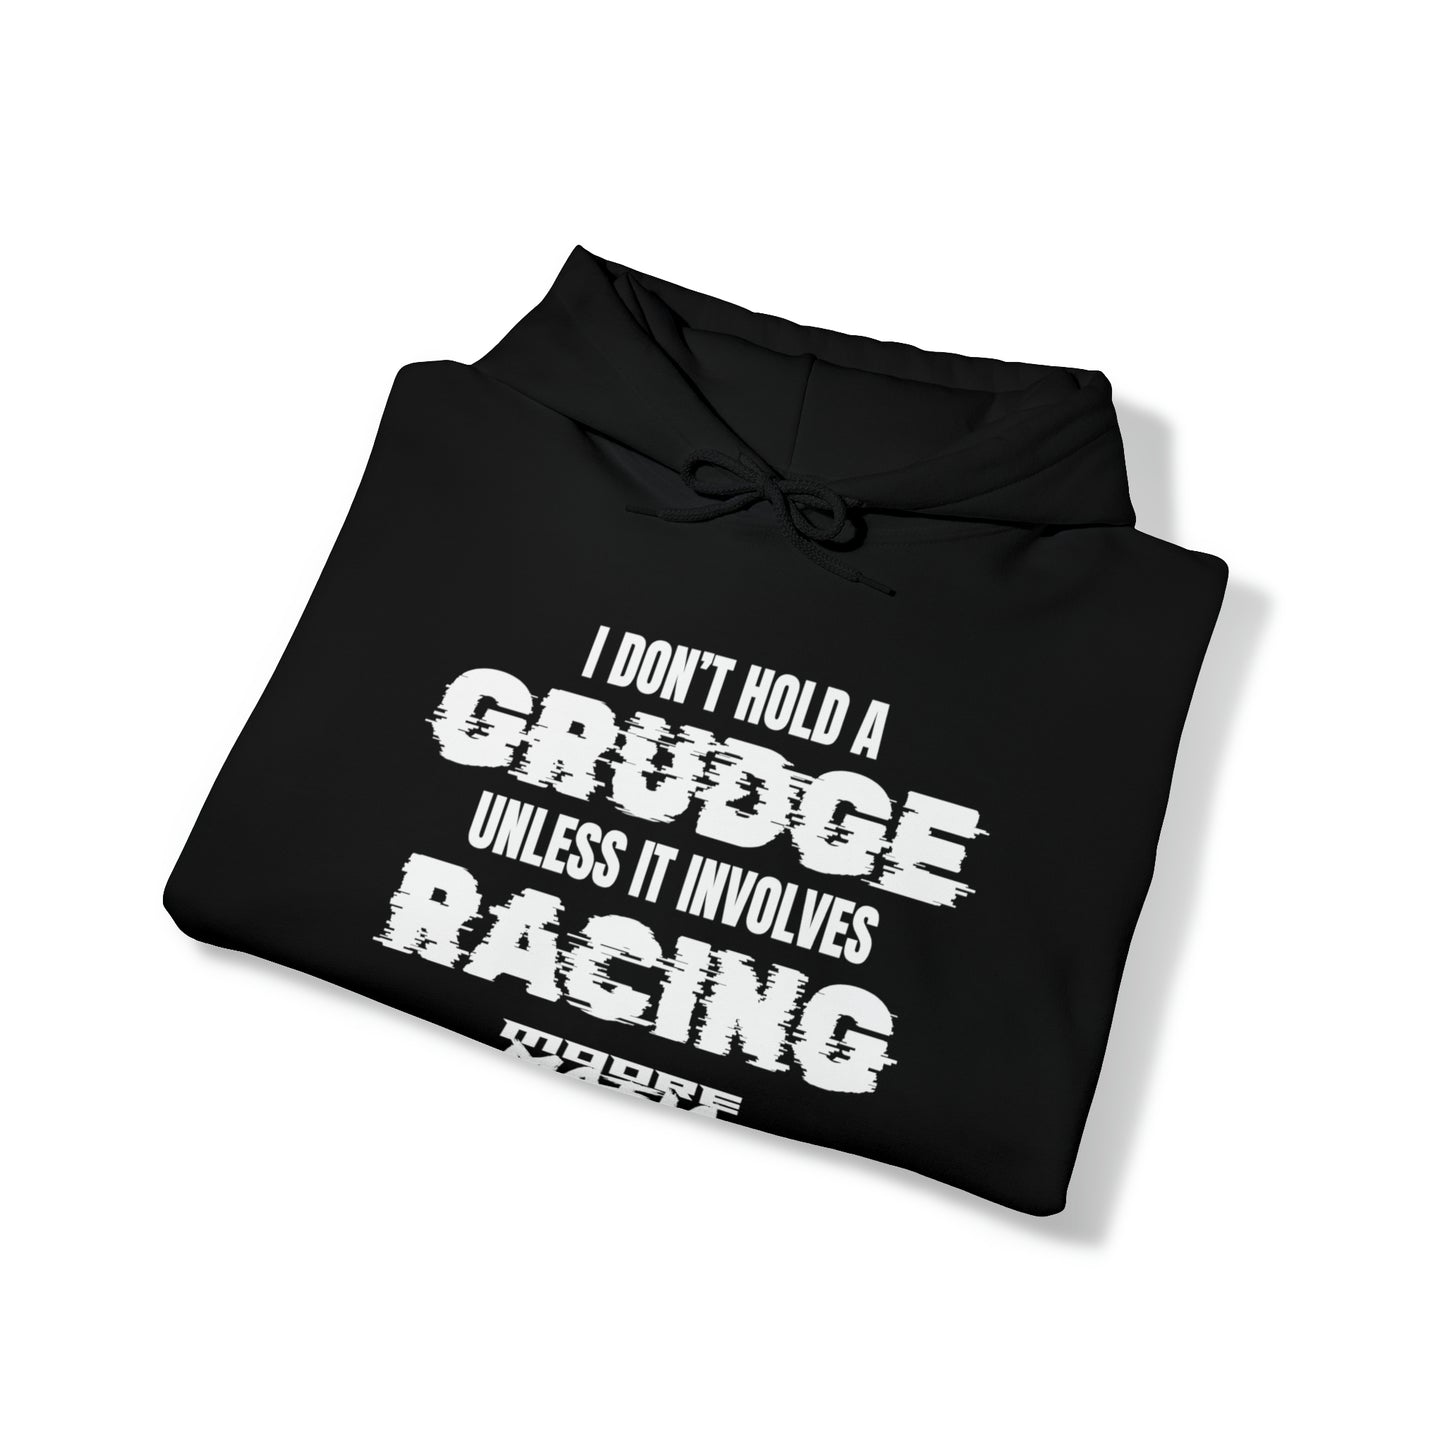 I Don't Hold A Grudge Hooded Sweatshirt